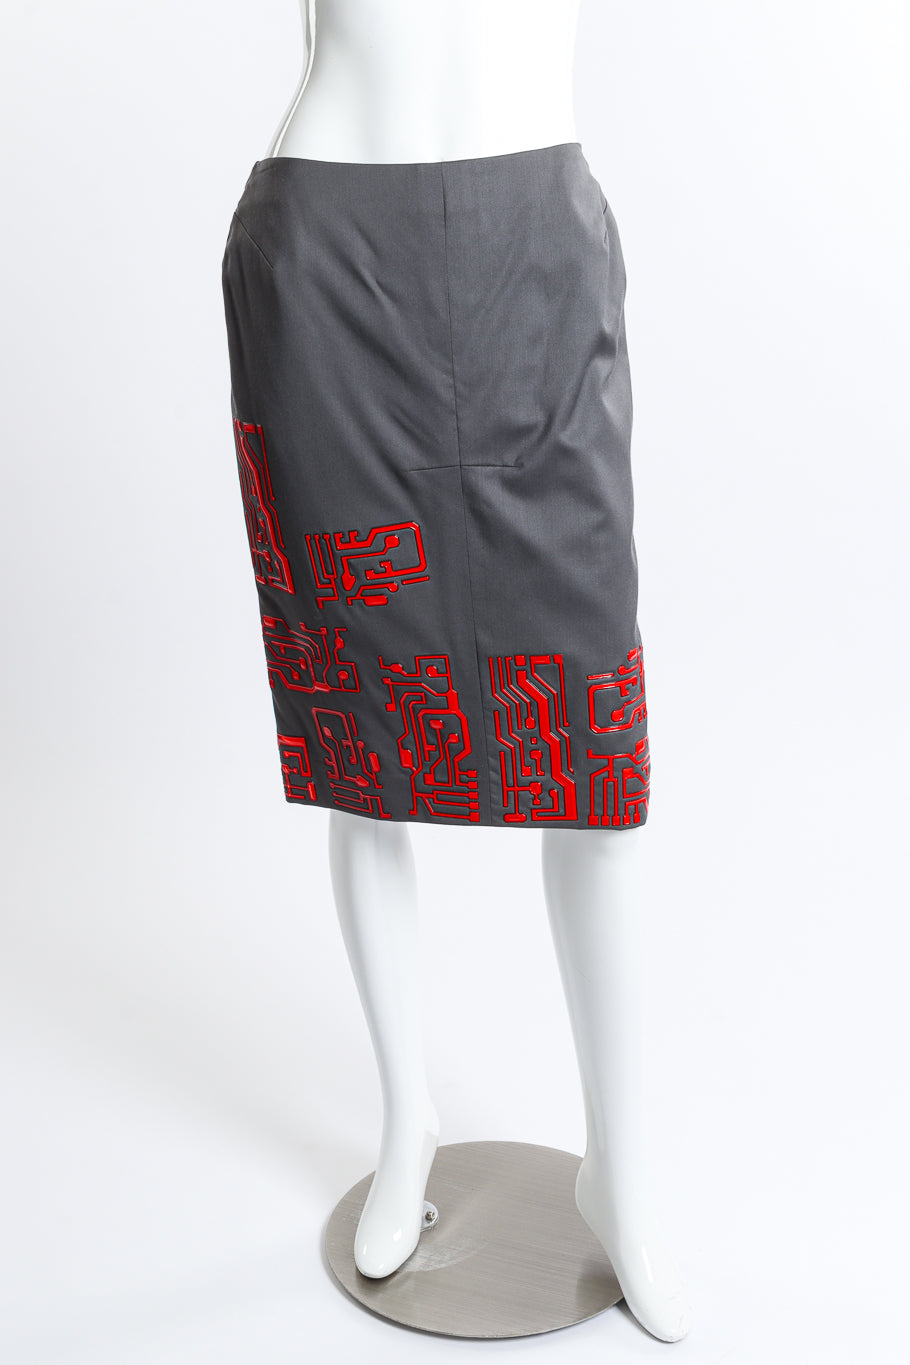 Vintage Givenchy 1999 F/W Circuit Board Zip Up Jacket & Skirt Set skirt front on mannequin @recess la